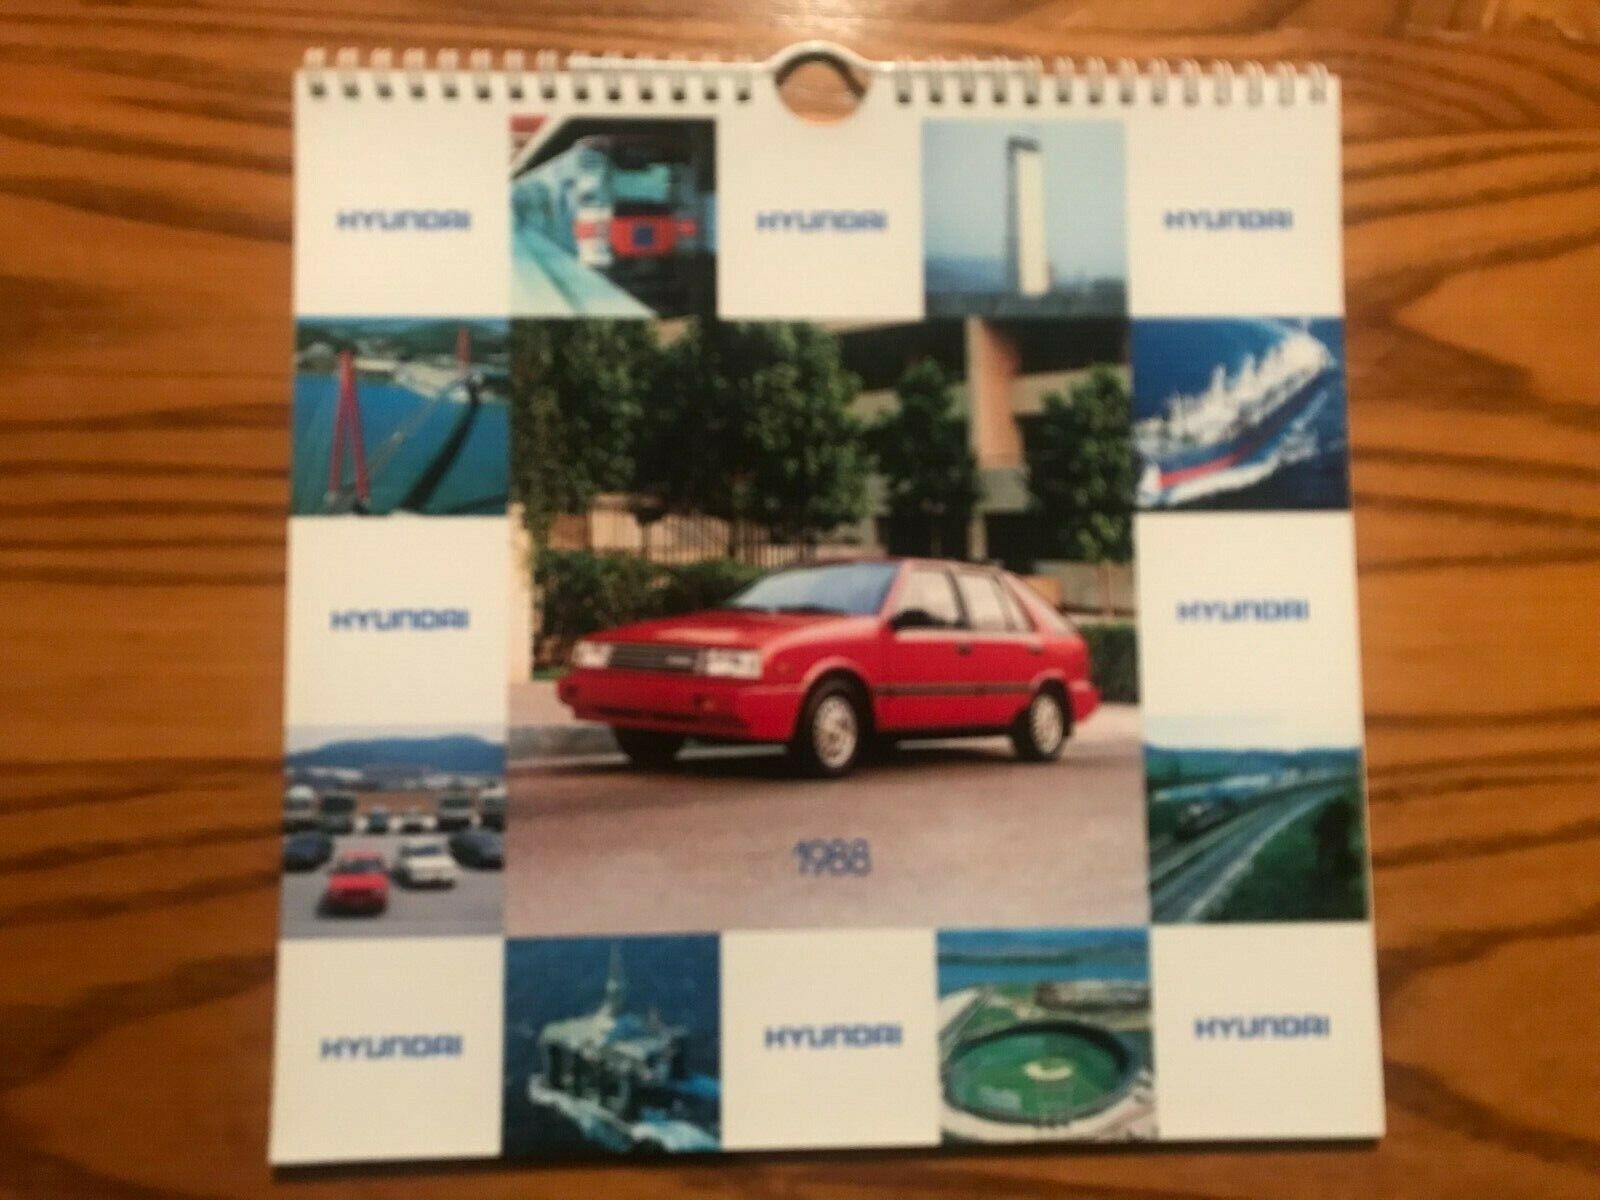 1988 Hyundai Wall Calendar - Unused - Shows Excel In All Various Configurations